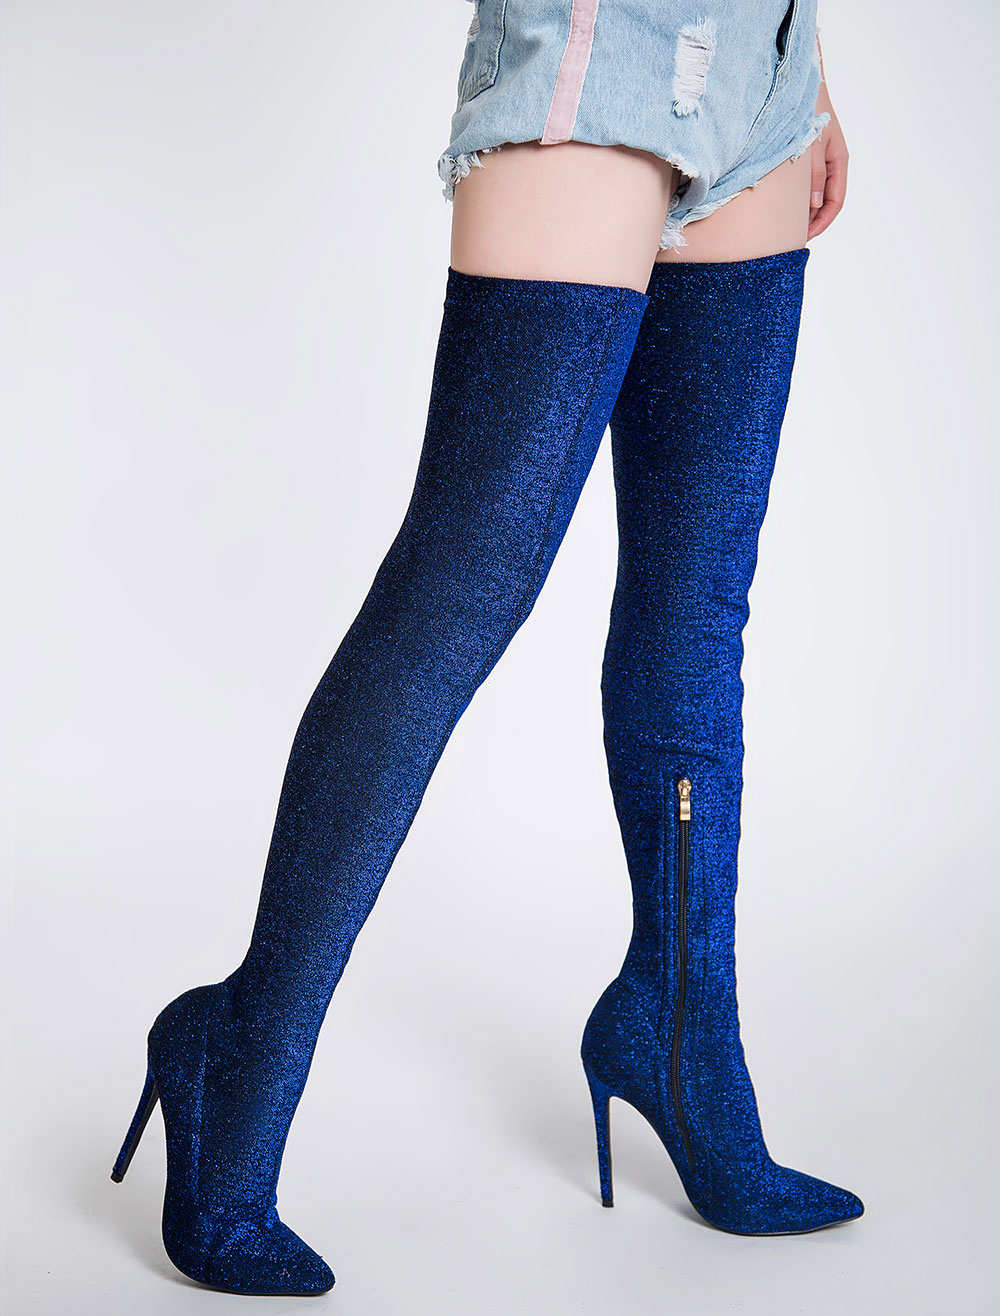 Thigh High Boots Womens Sequined Cloth 